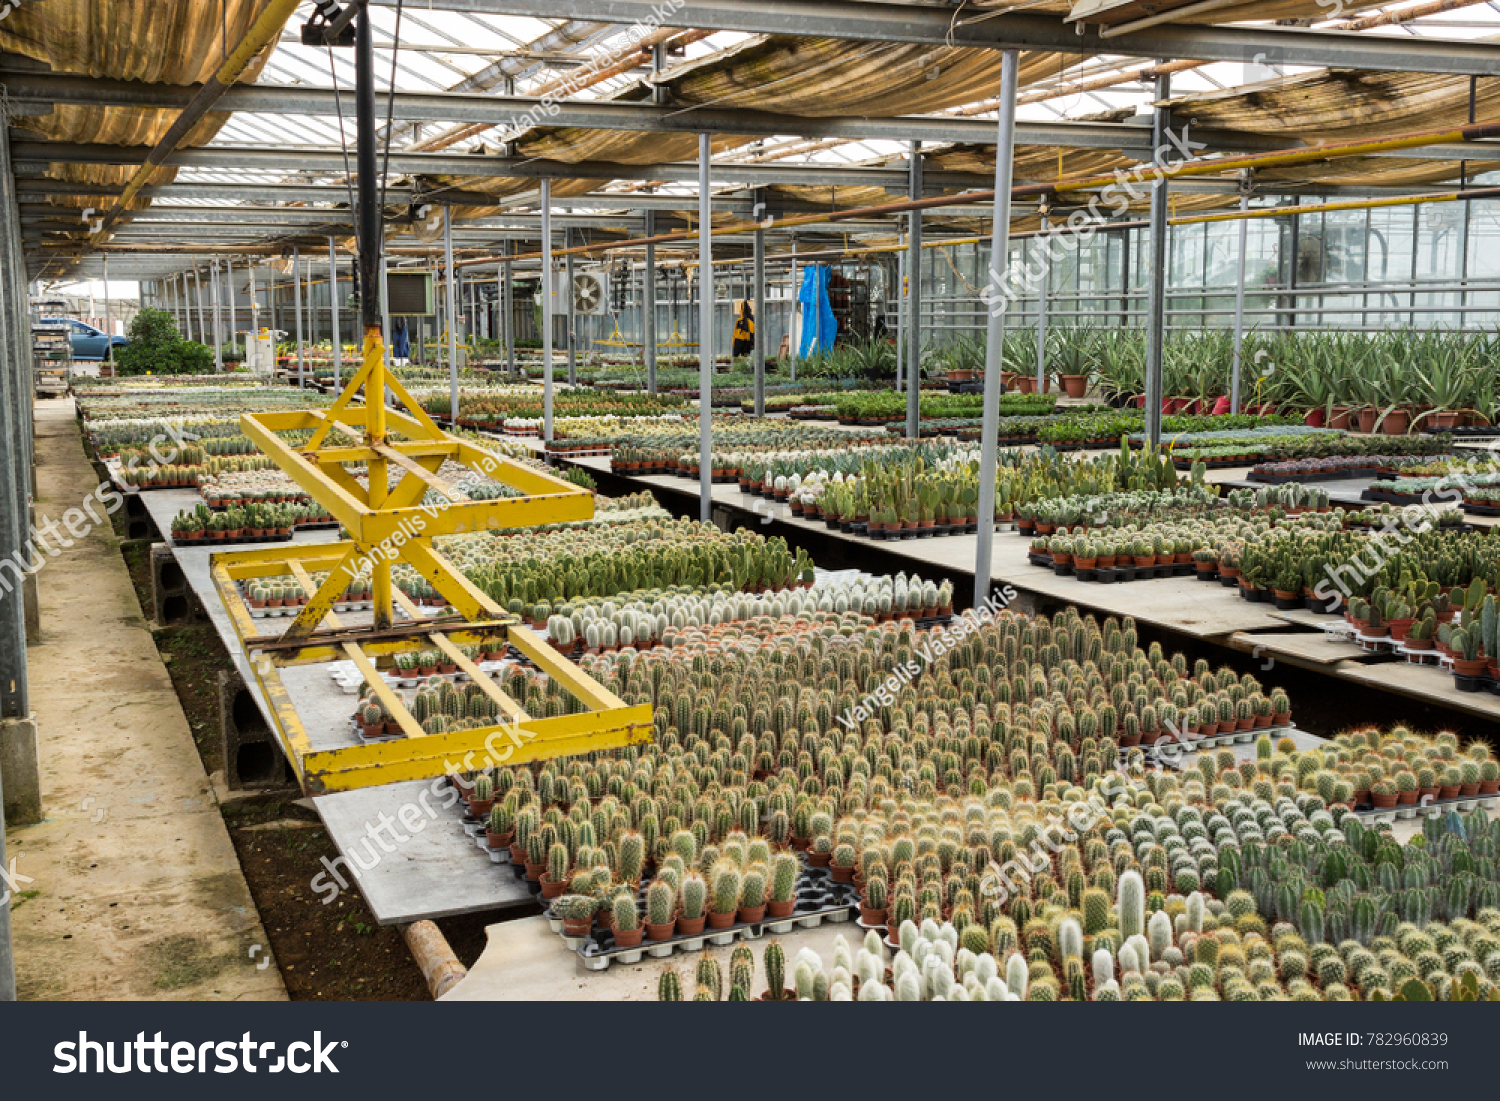 Athens Greece December 9 2017 Cacti Industrial Stock Image